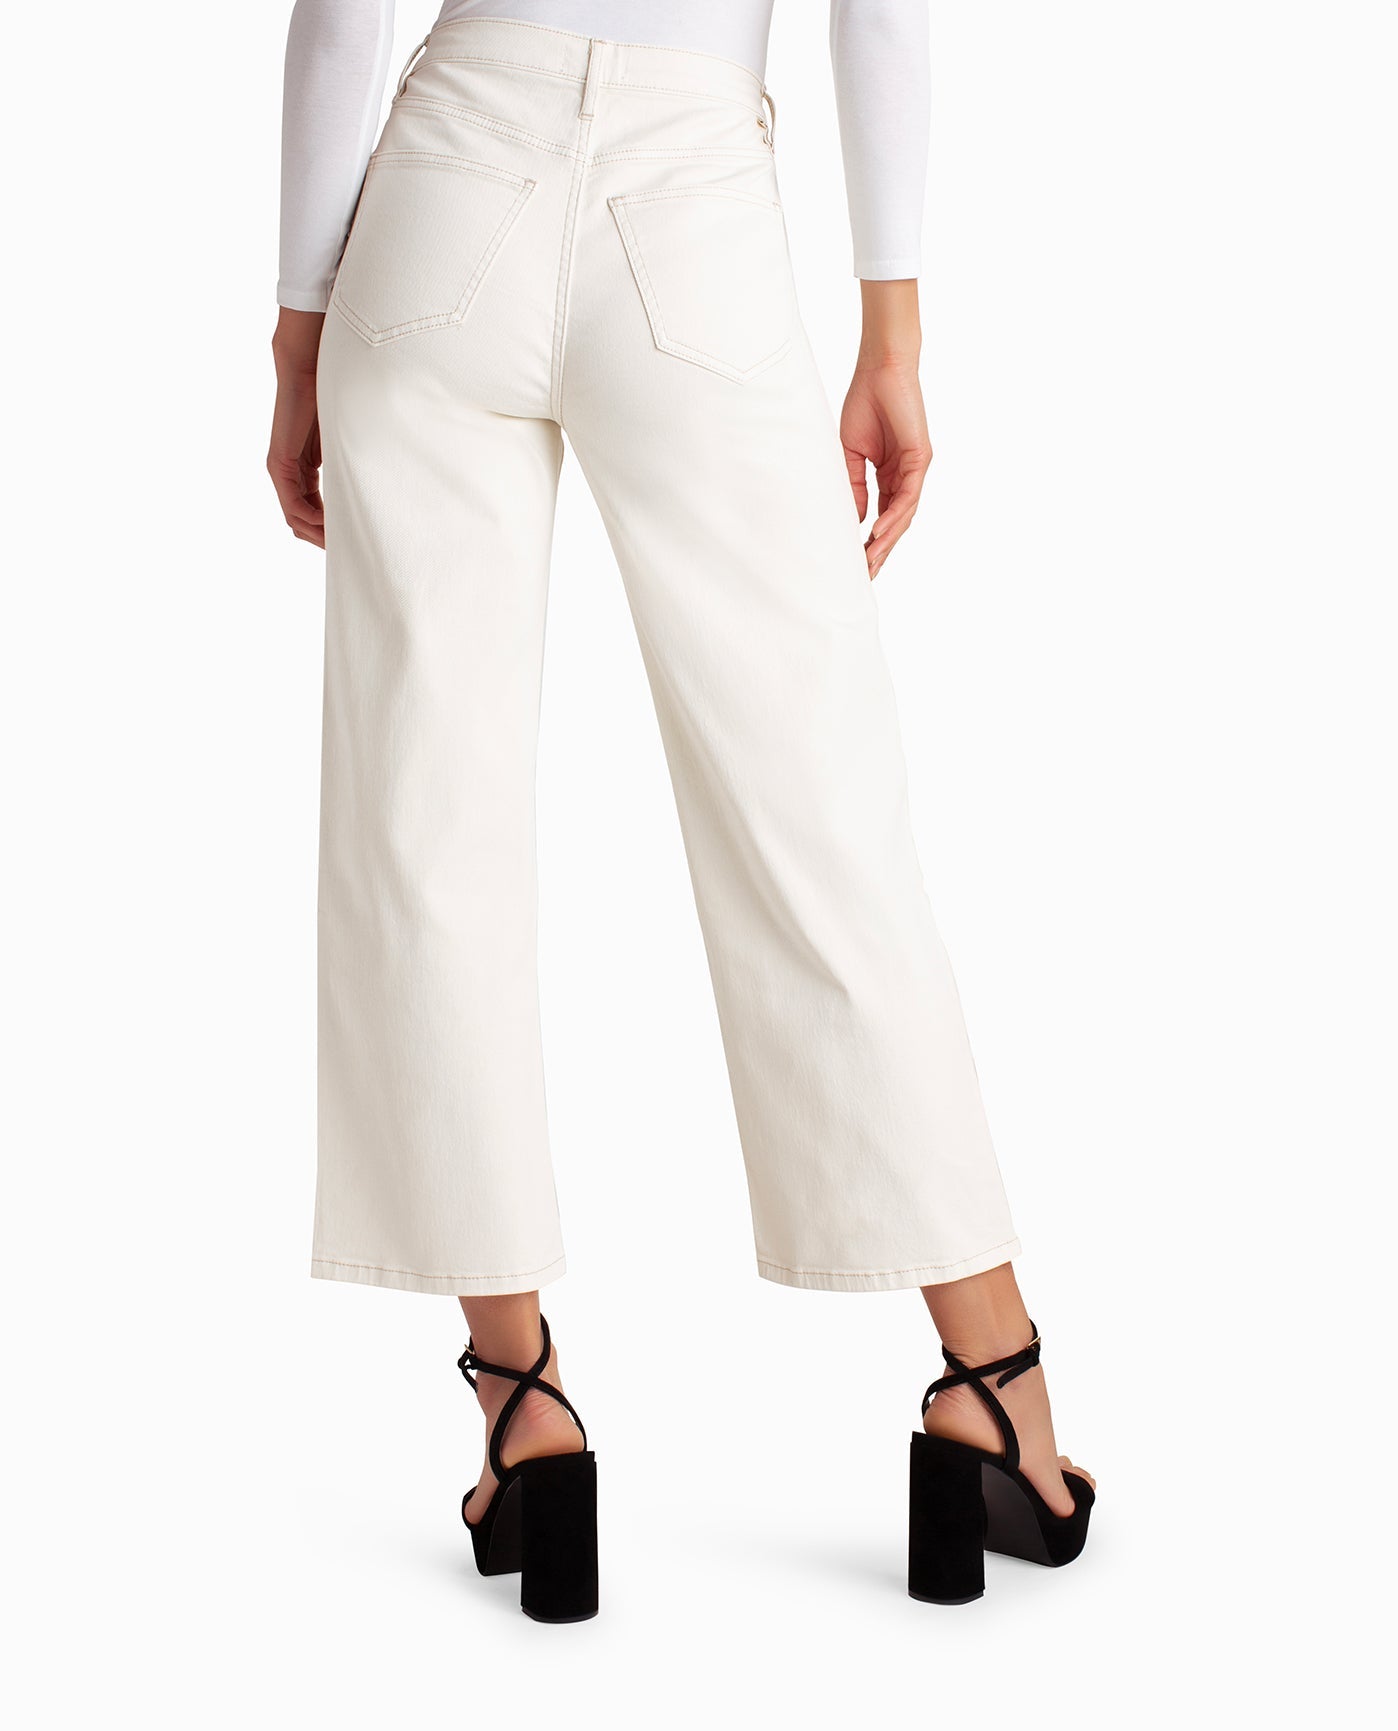 9 Stylish White Jeans Outfits for Every Occasion